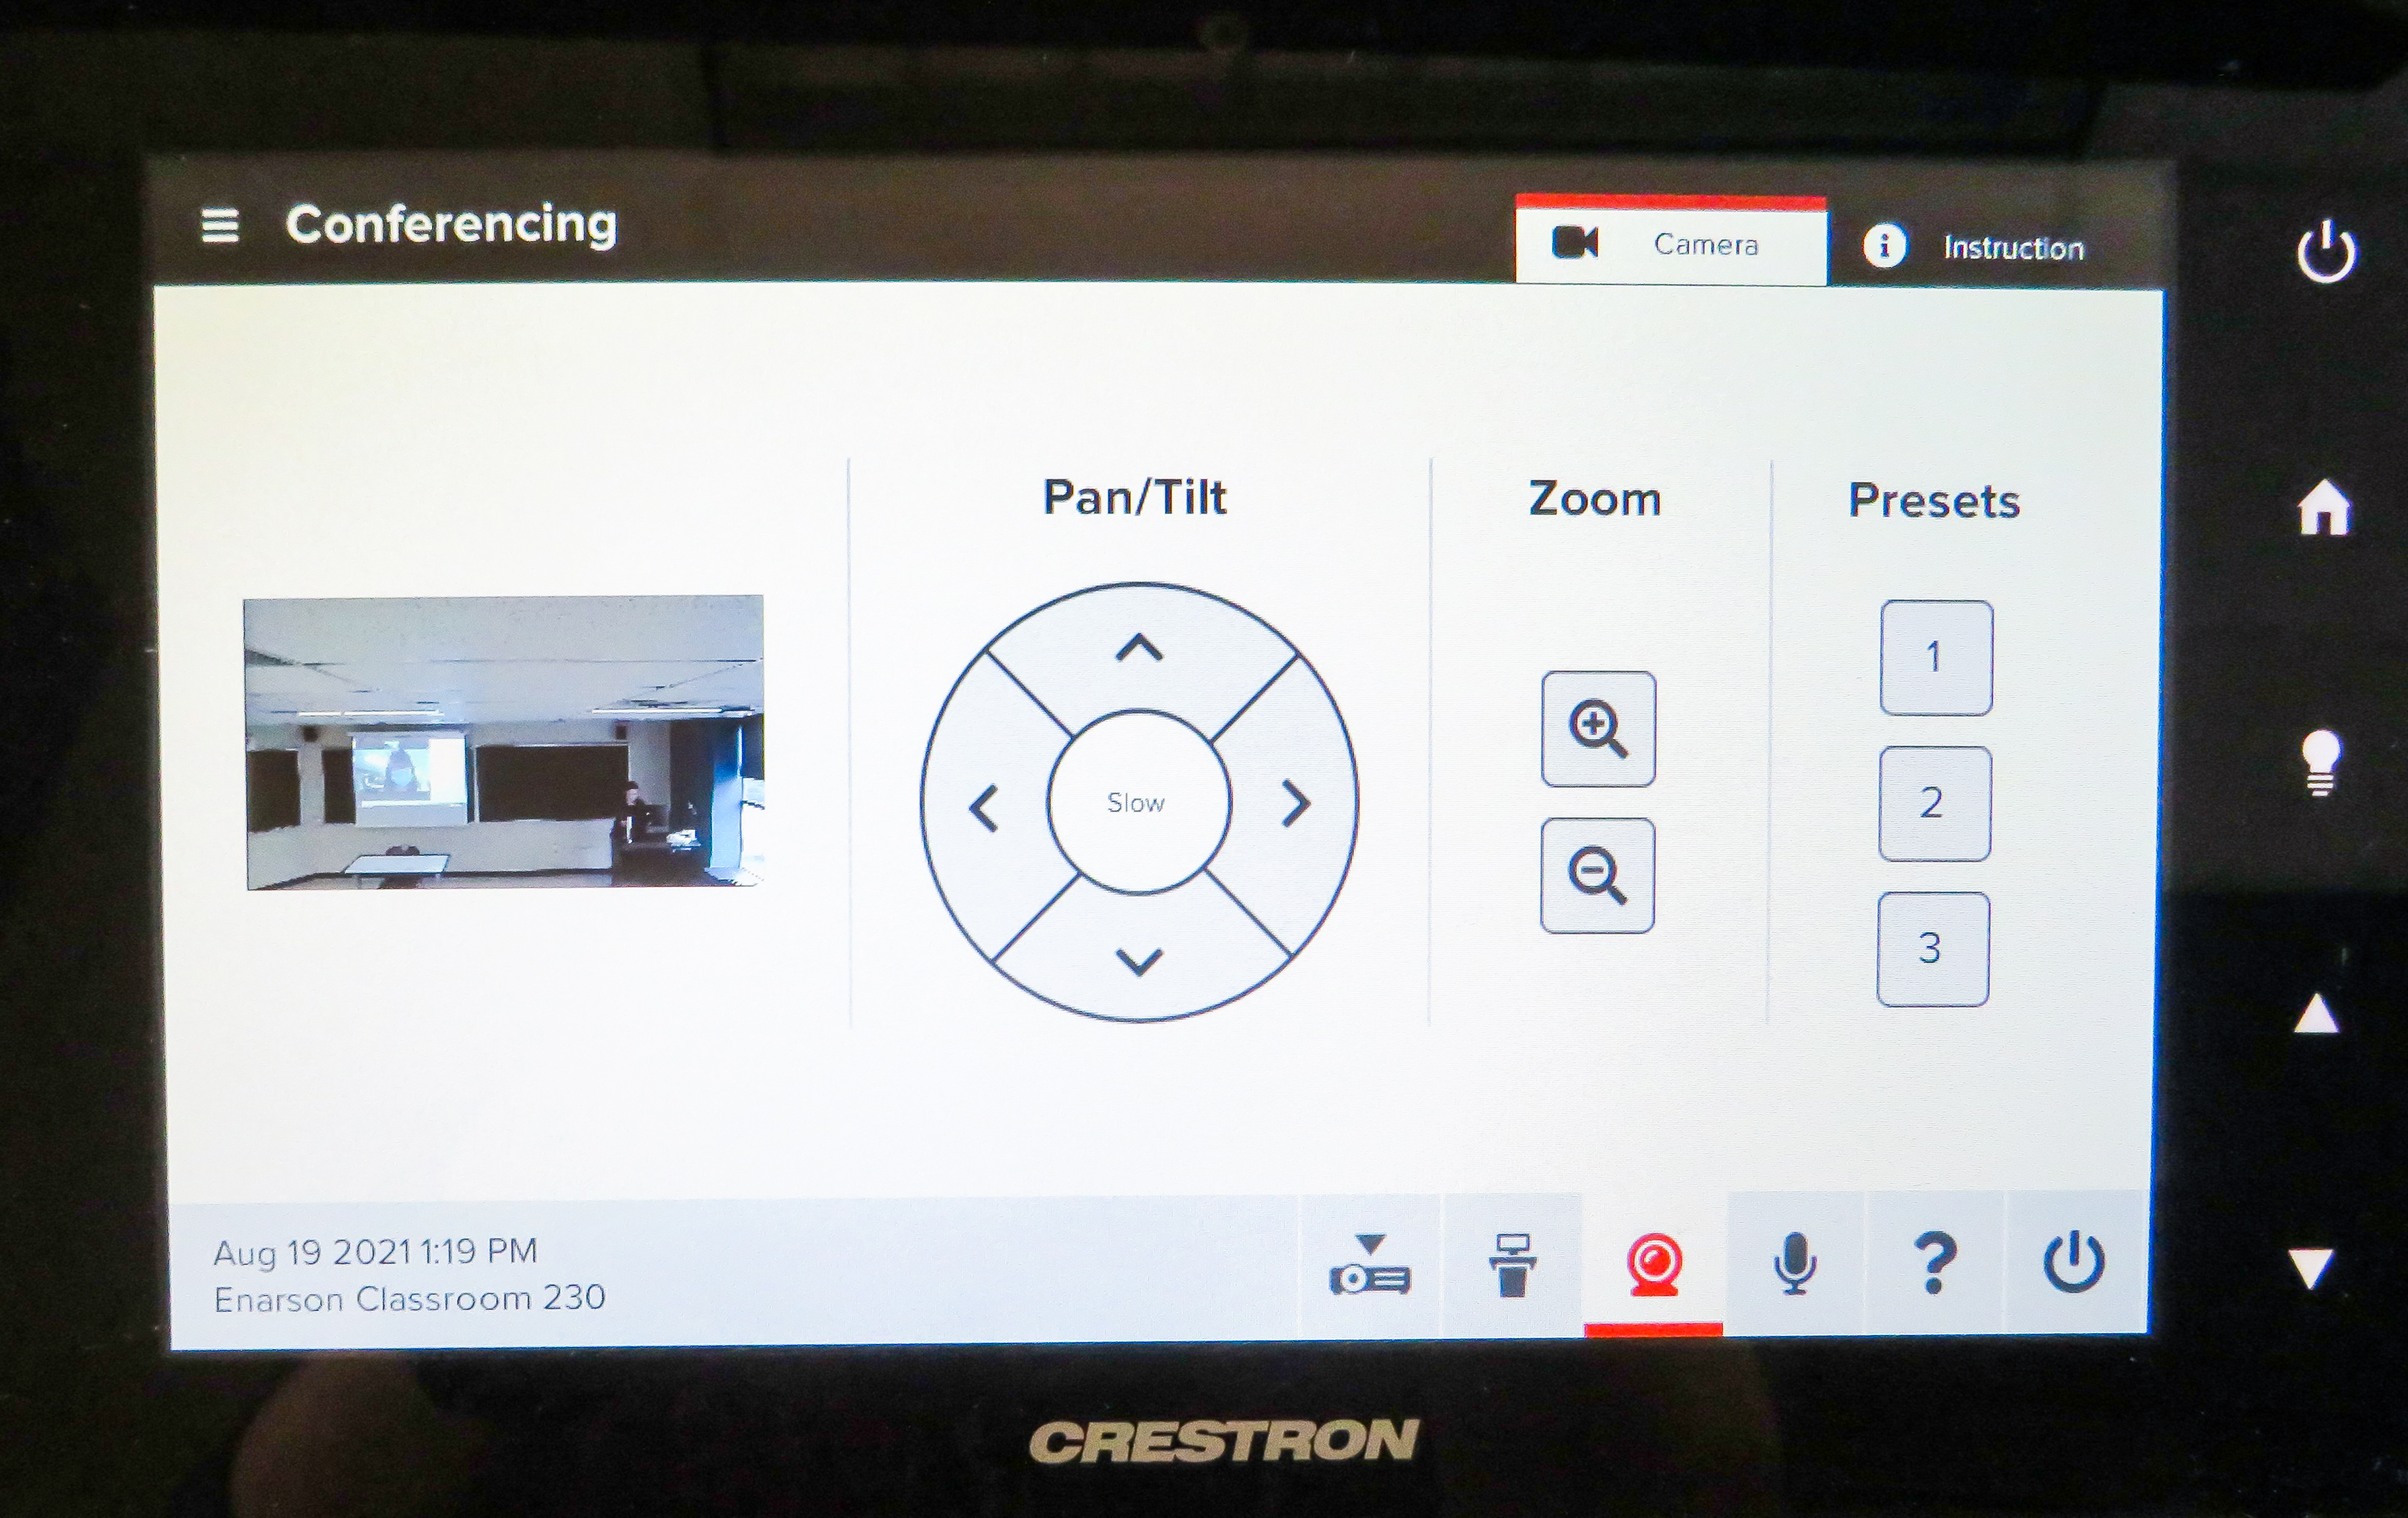 The control panel for classroom cameras, including the pan/tilt controls, zoom in and zoom out, and three preset buttons